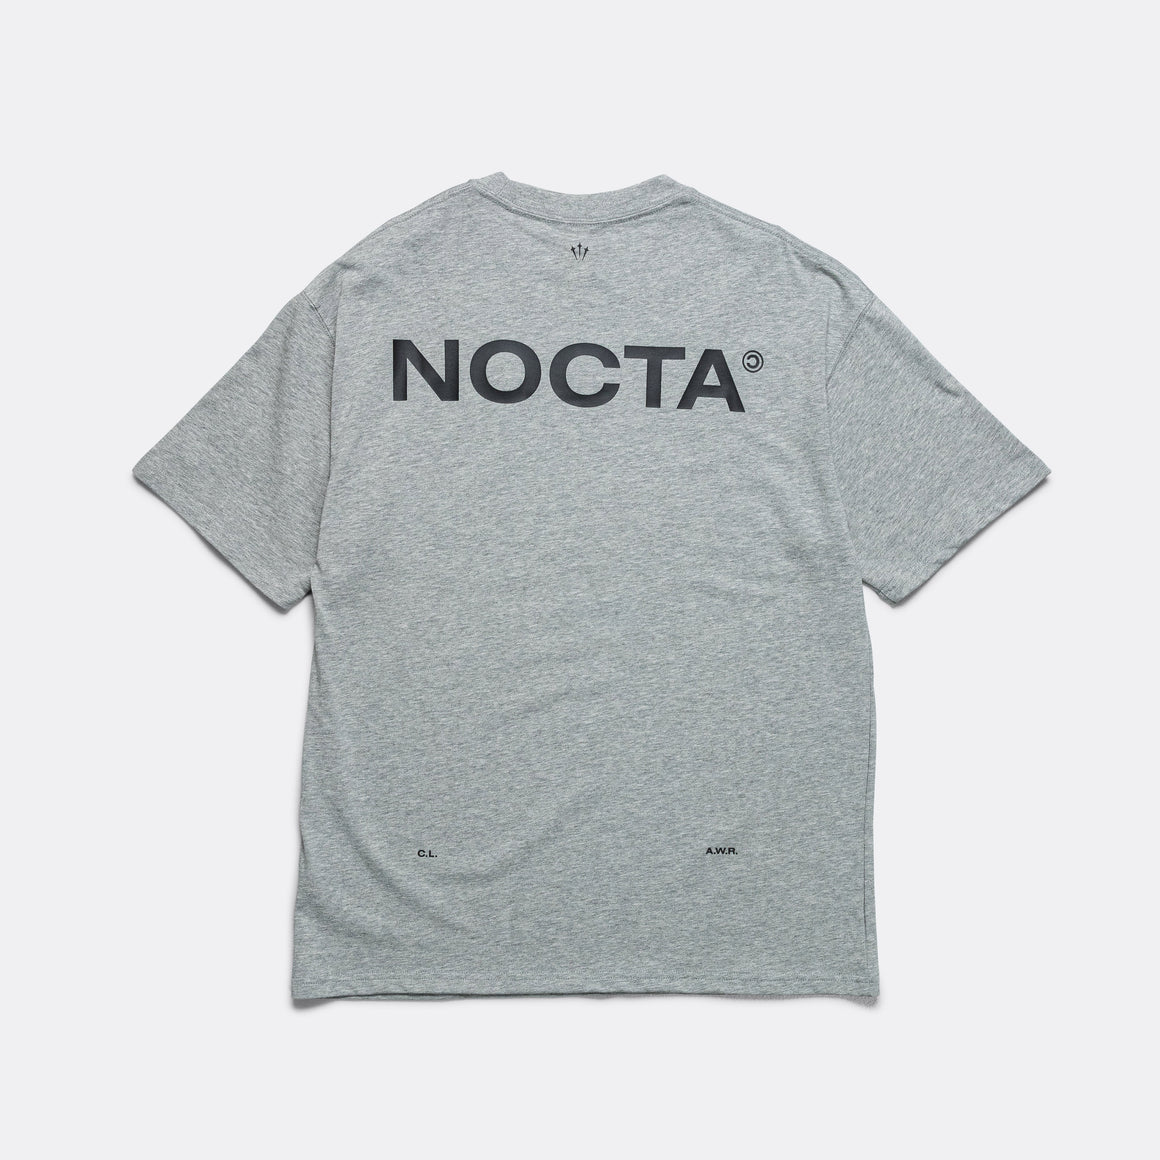 Nike - NOCTA SS Tee - Dk Grey Heather/Black - UP THERE